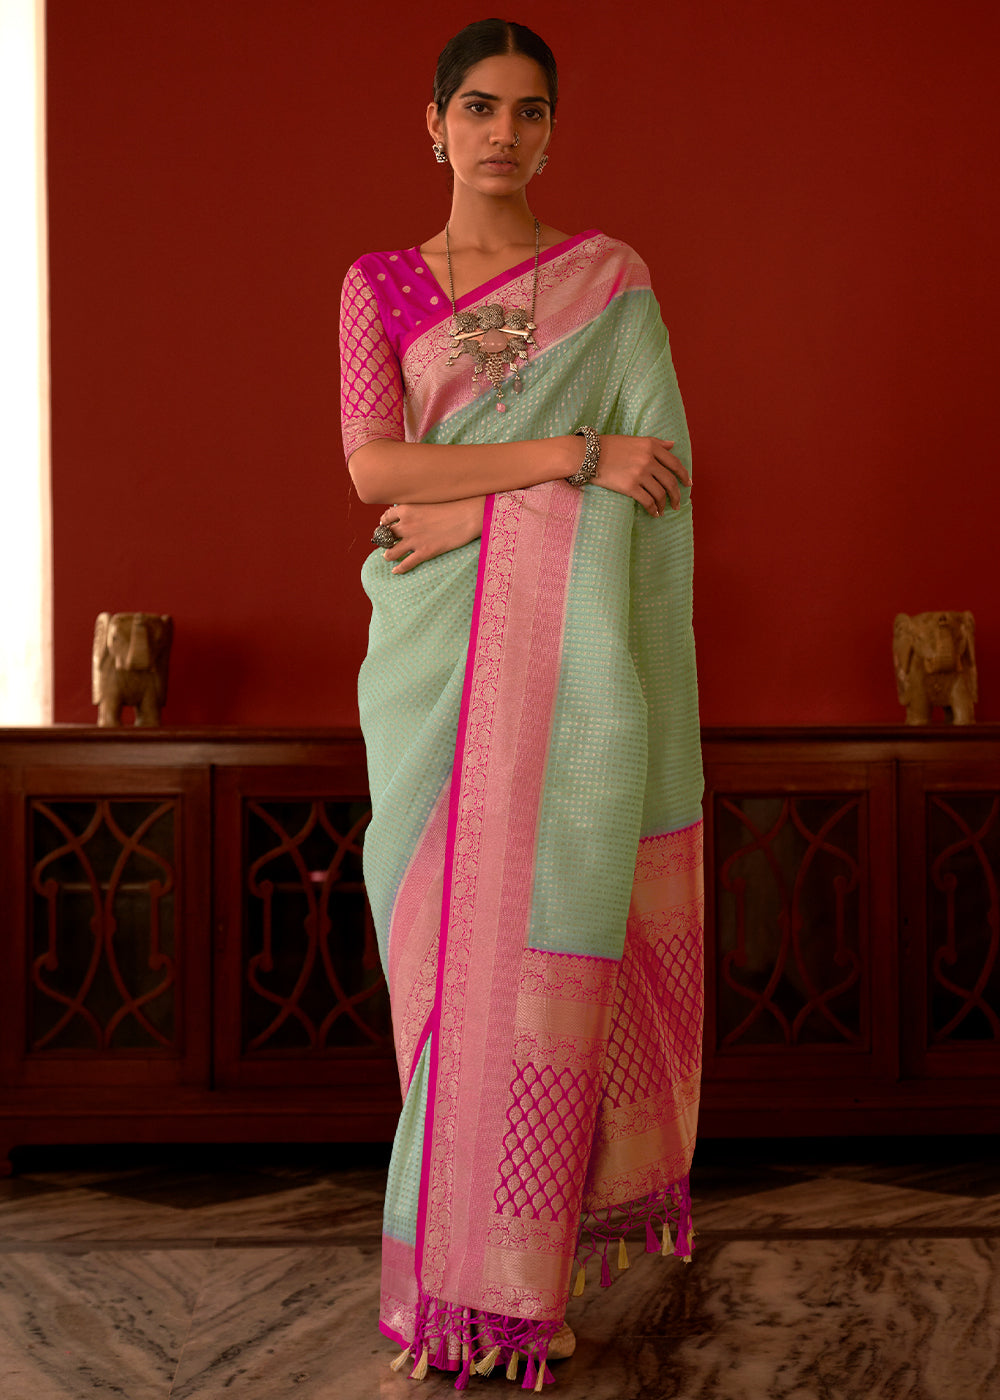 BOTTLE GREEN AND GOLD BANARASI SAREE WITH CONTRAST PINK DETAILS –  Toshaany.com